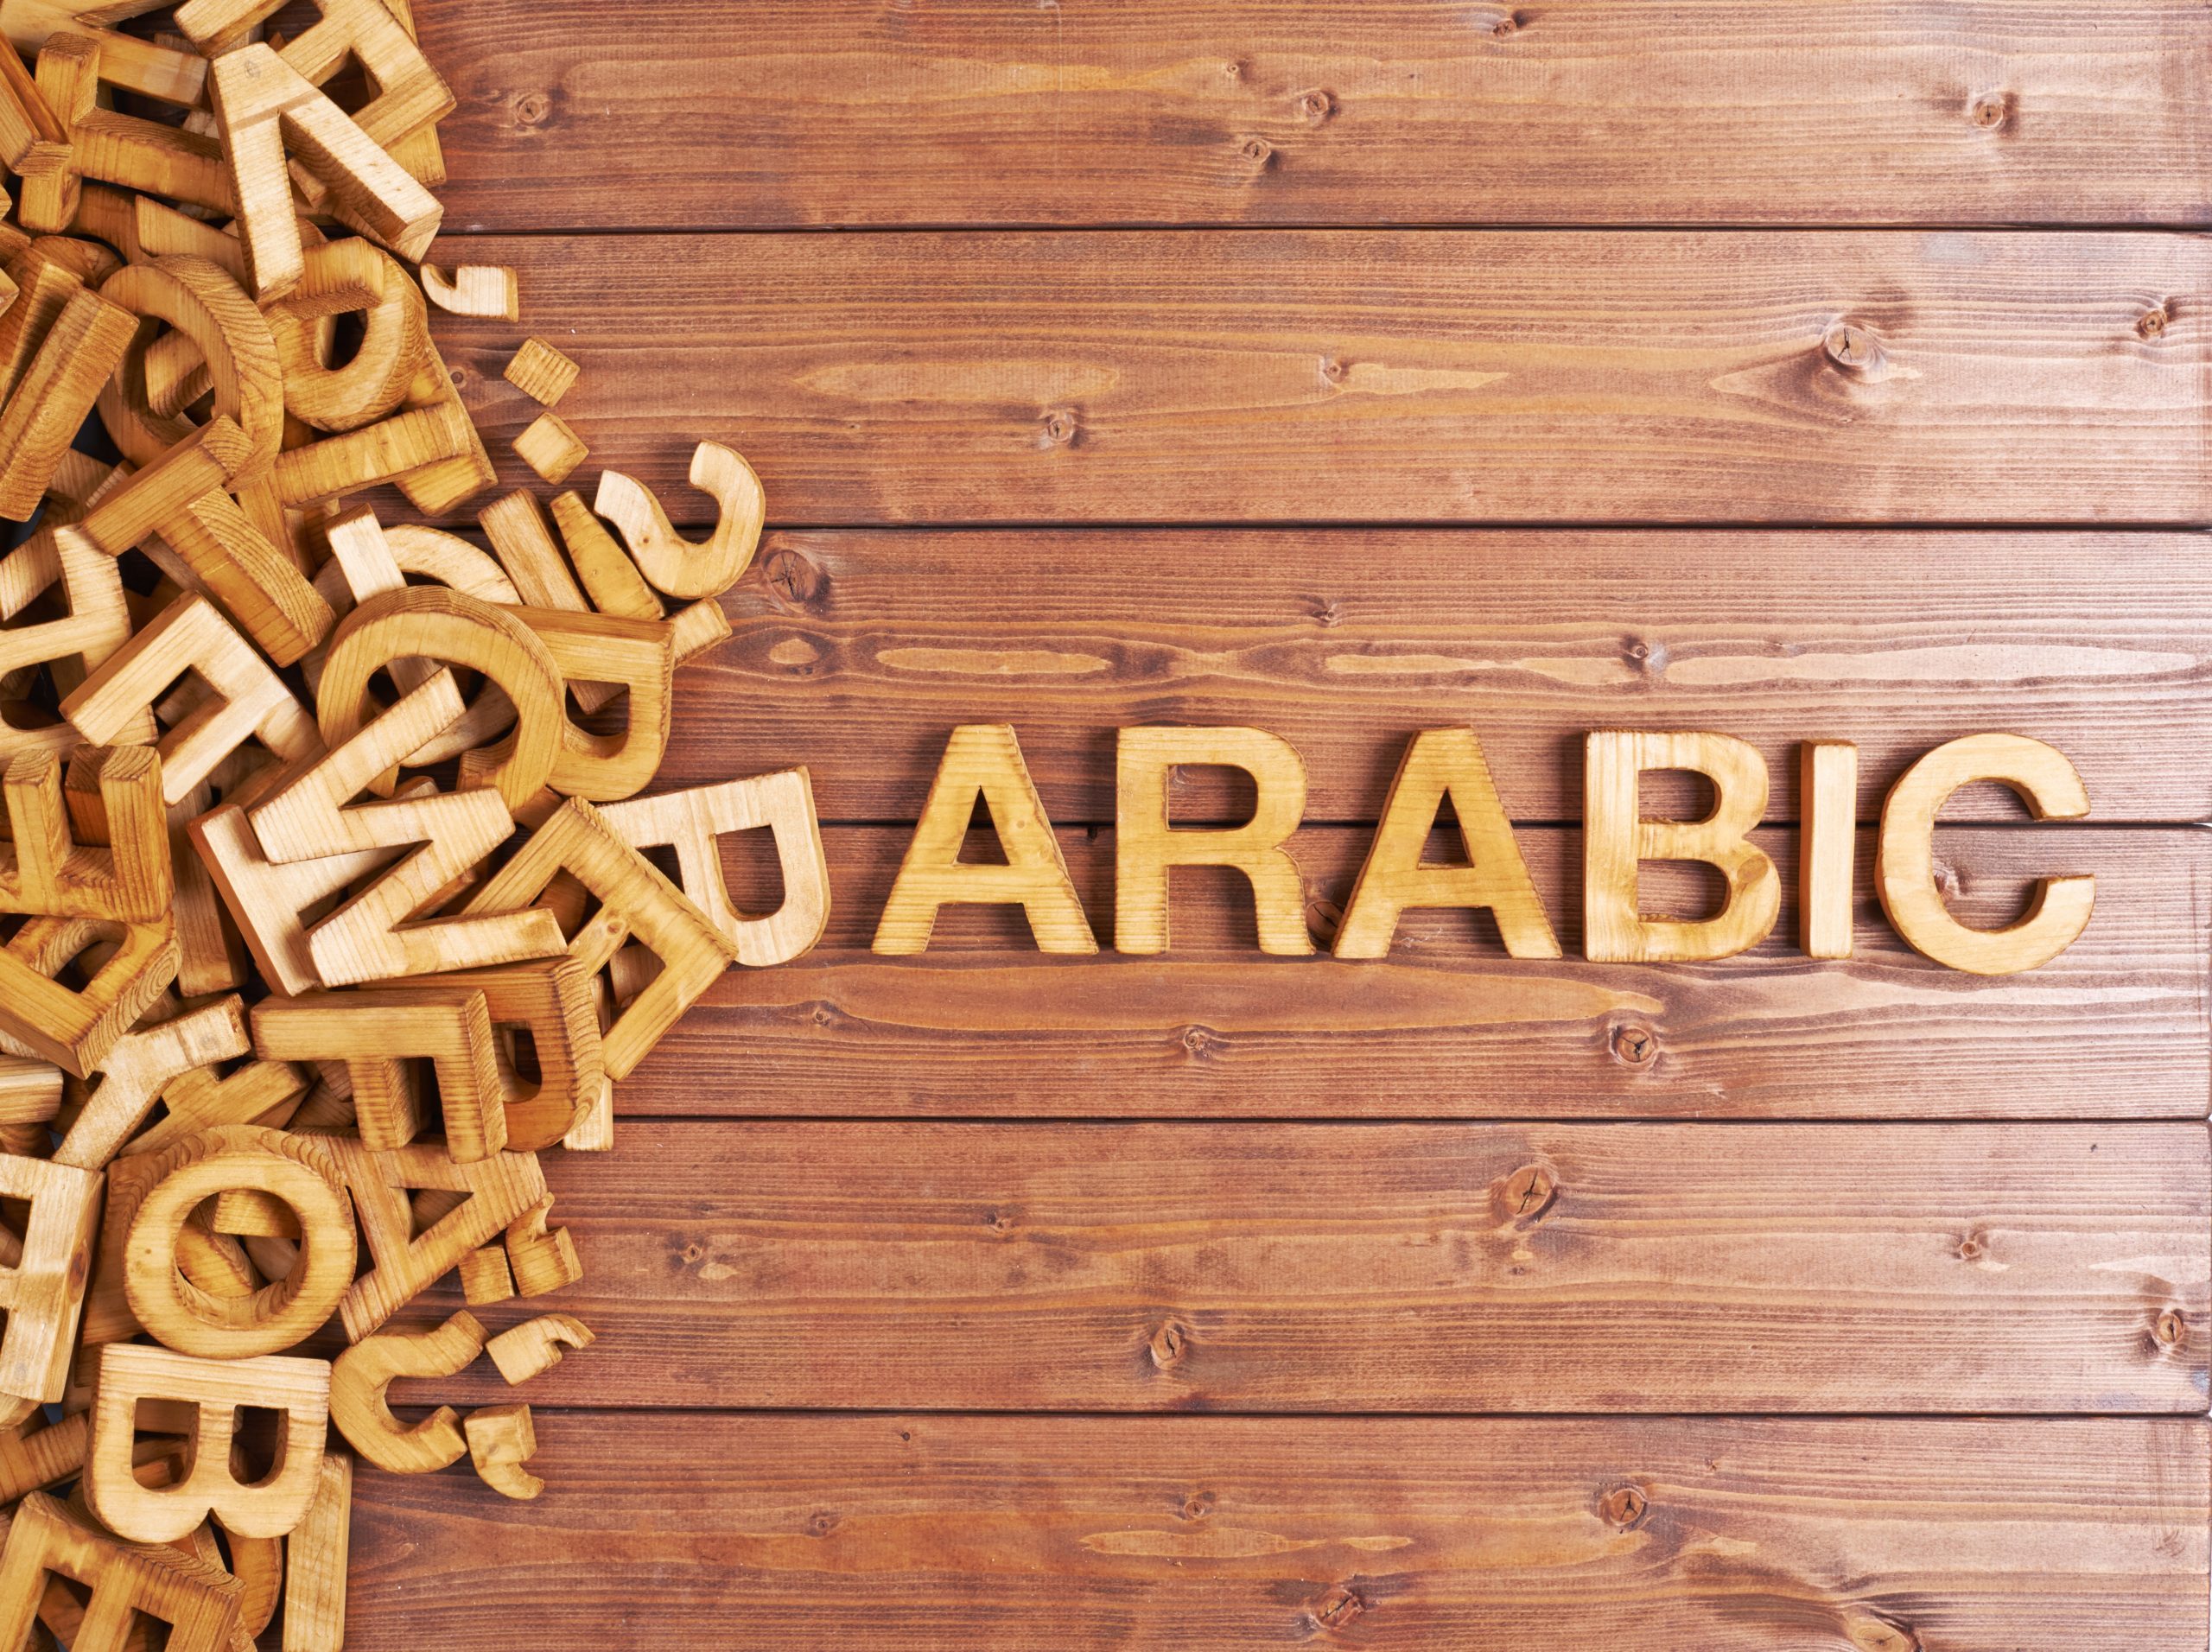 Want to learn basic Arabic words? Why not start with the most common words so you'll be able to read and write in Arabic in no time.